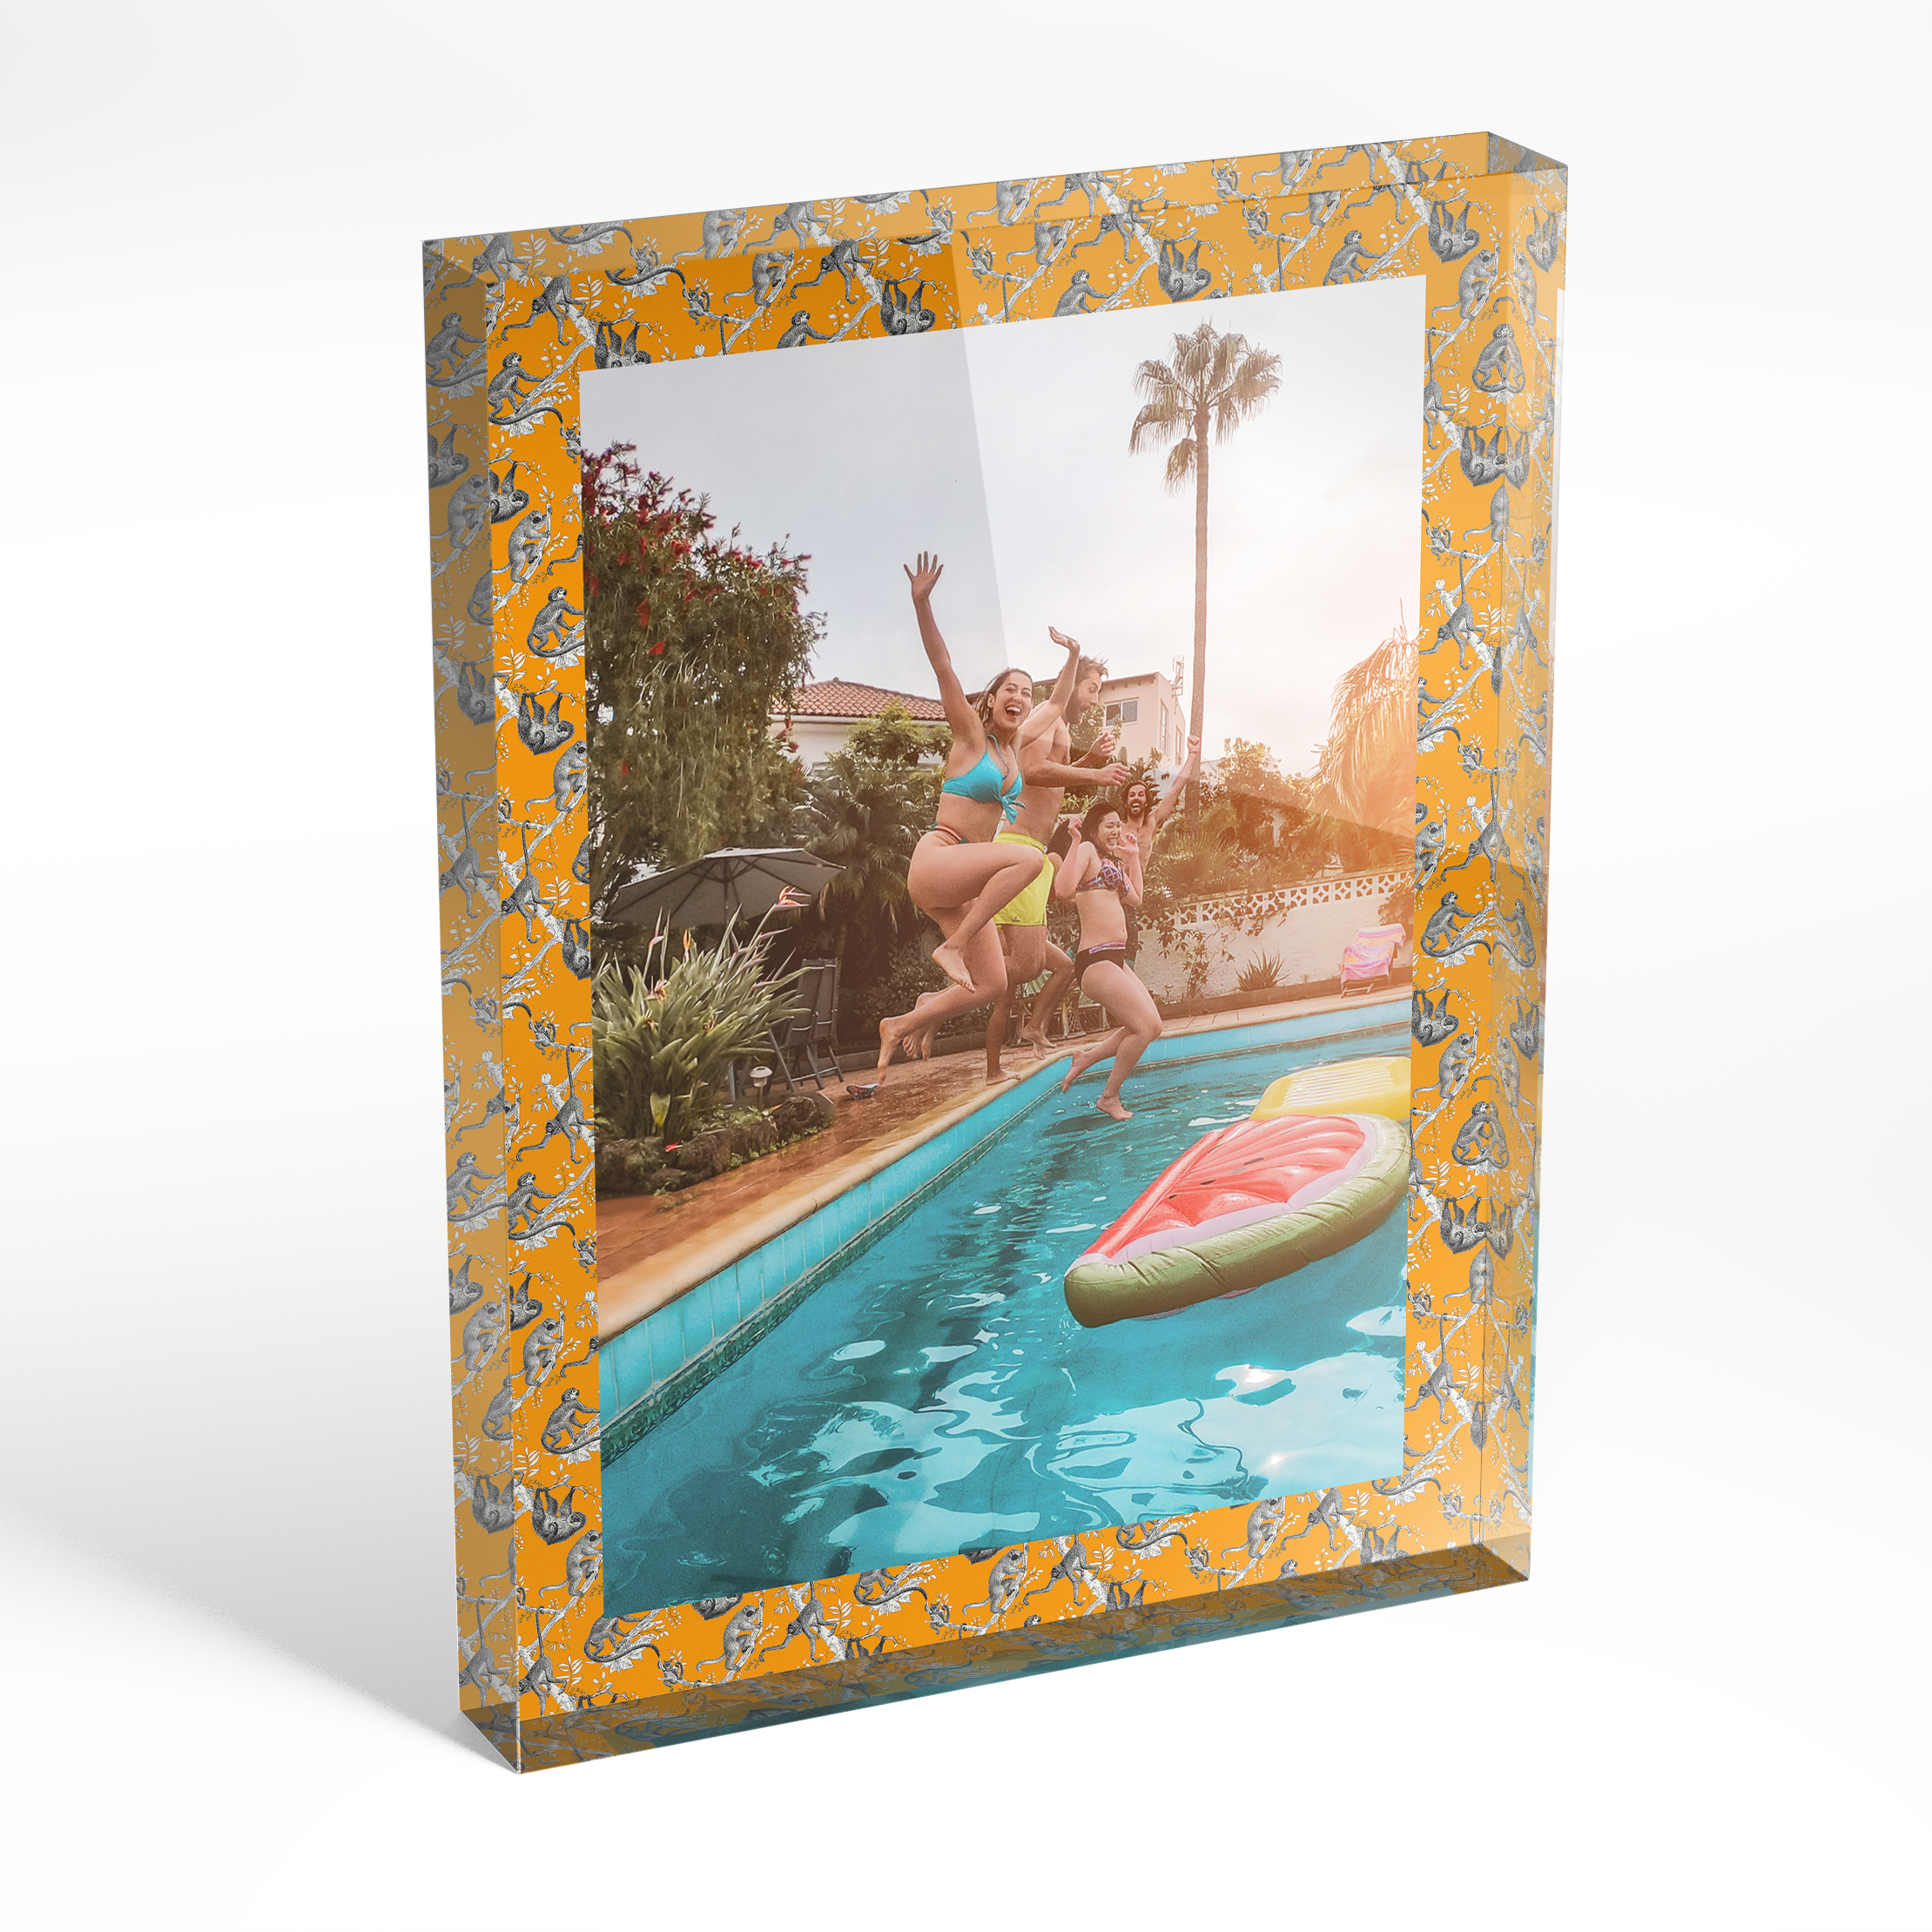 An angled side view of a portrait layout Acrylic Photo Block with space for 1 photo. Thiis design is named "Zingy Elegance". 